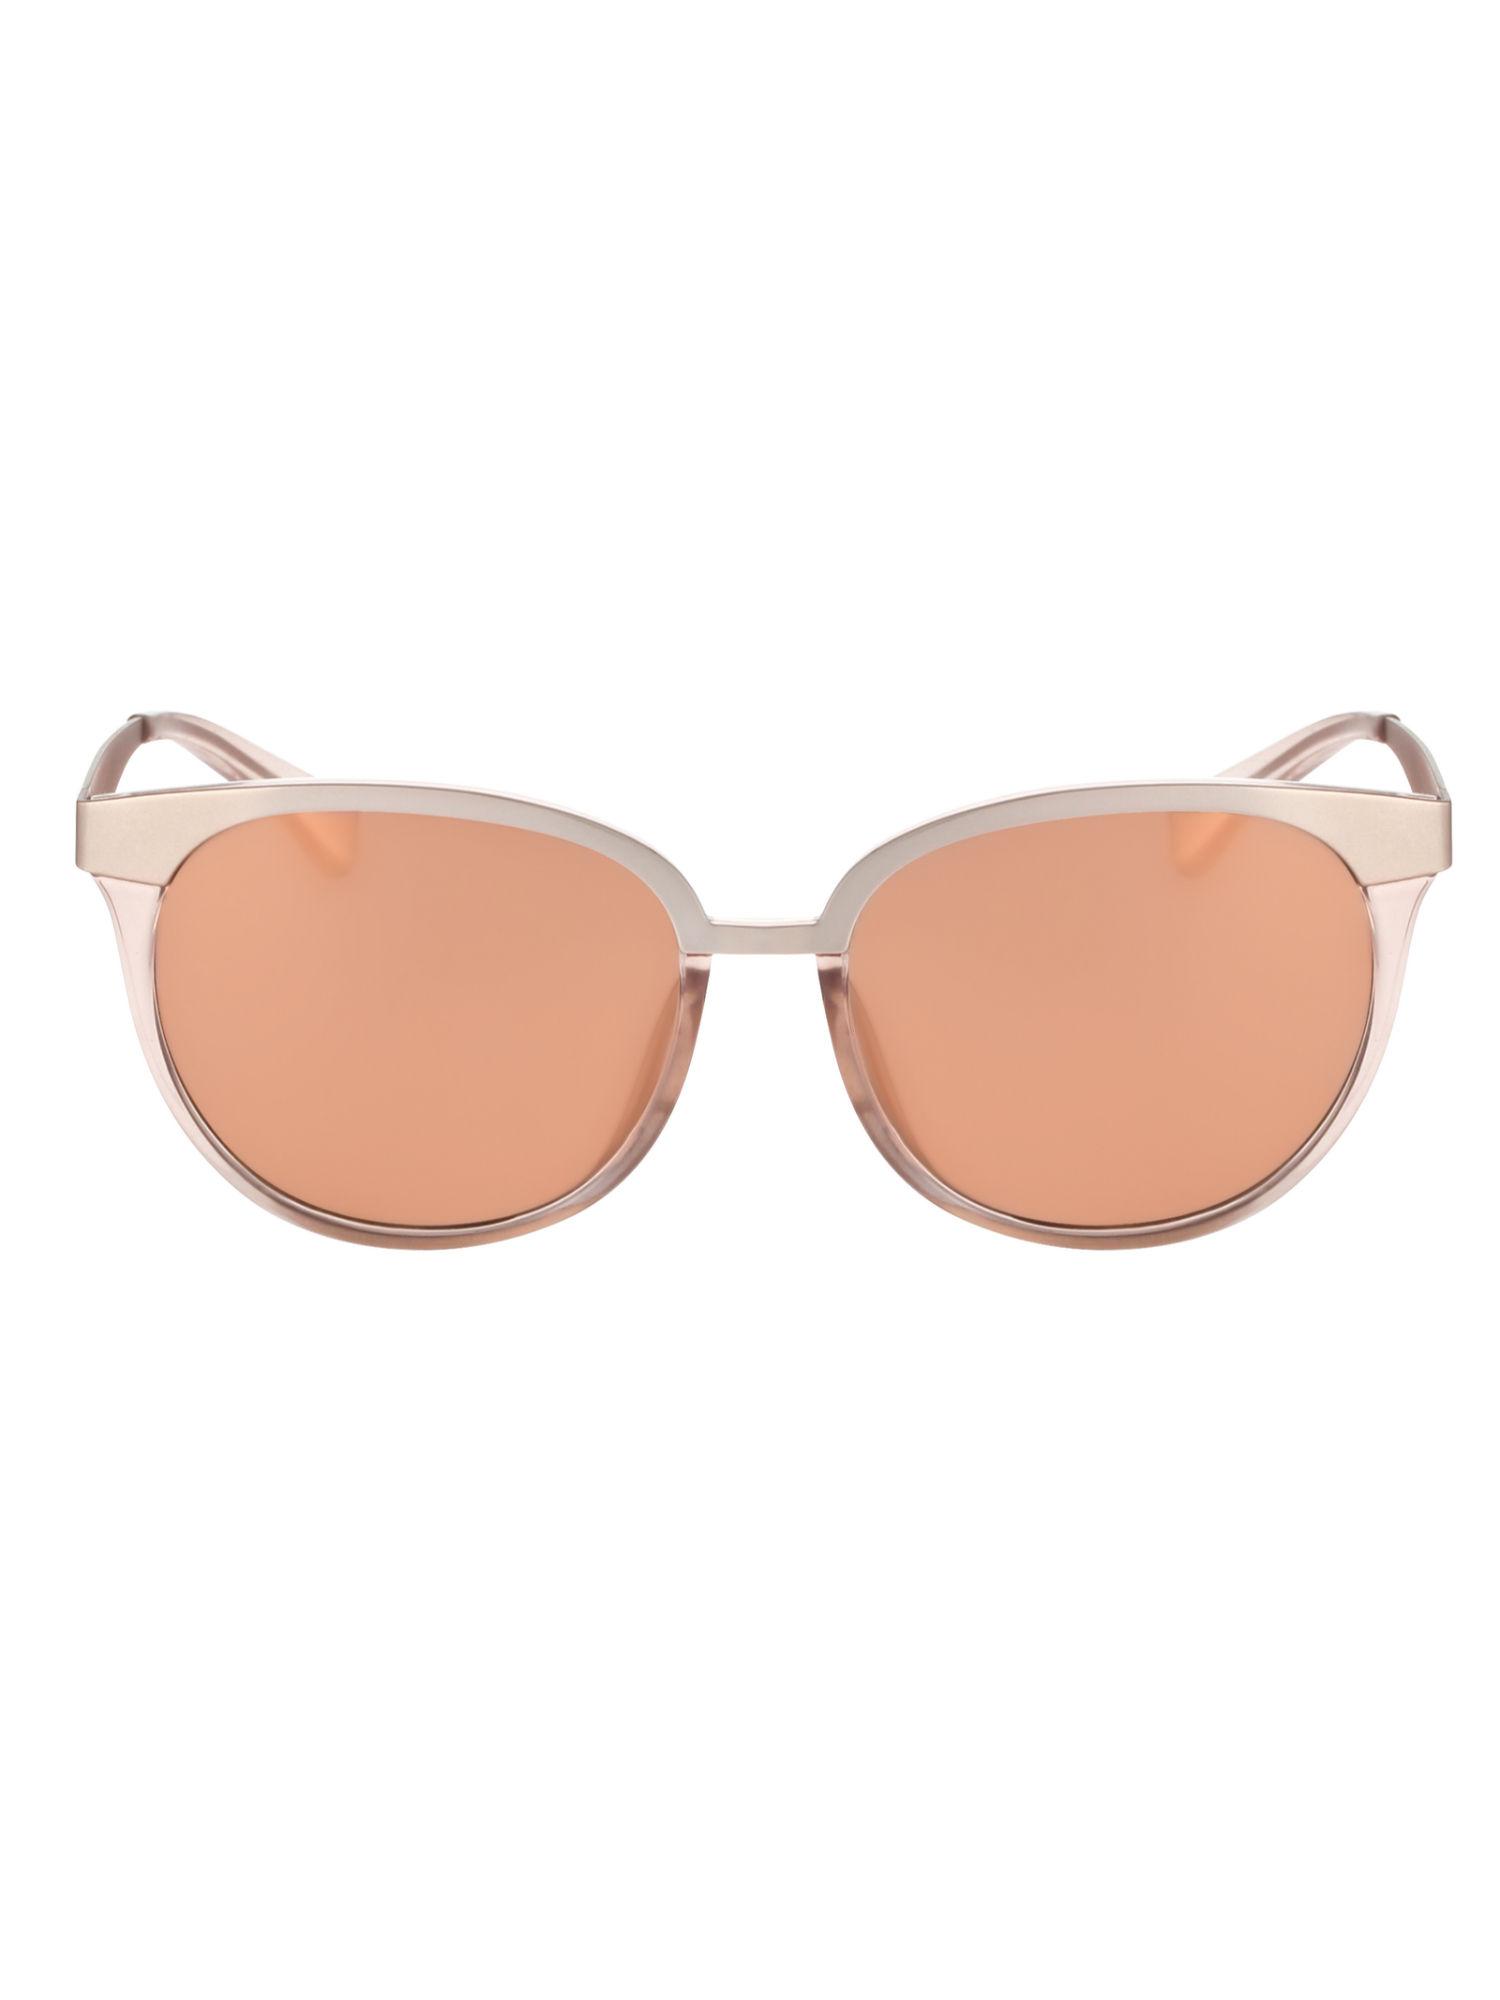 round-sunglasses-with-peach-lens-for-unisex